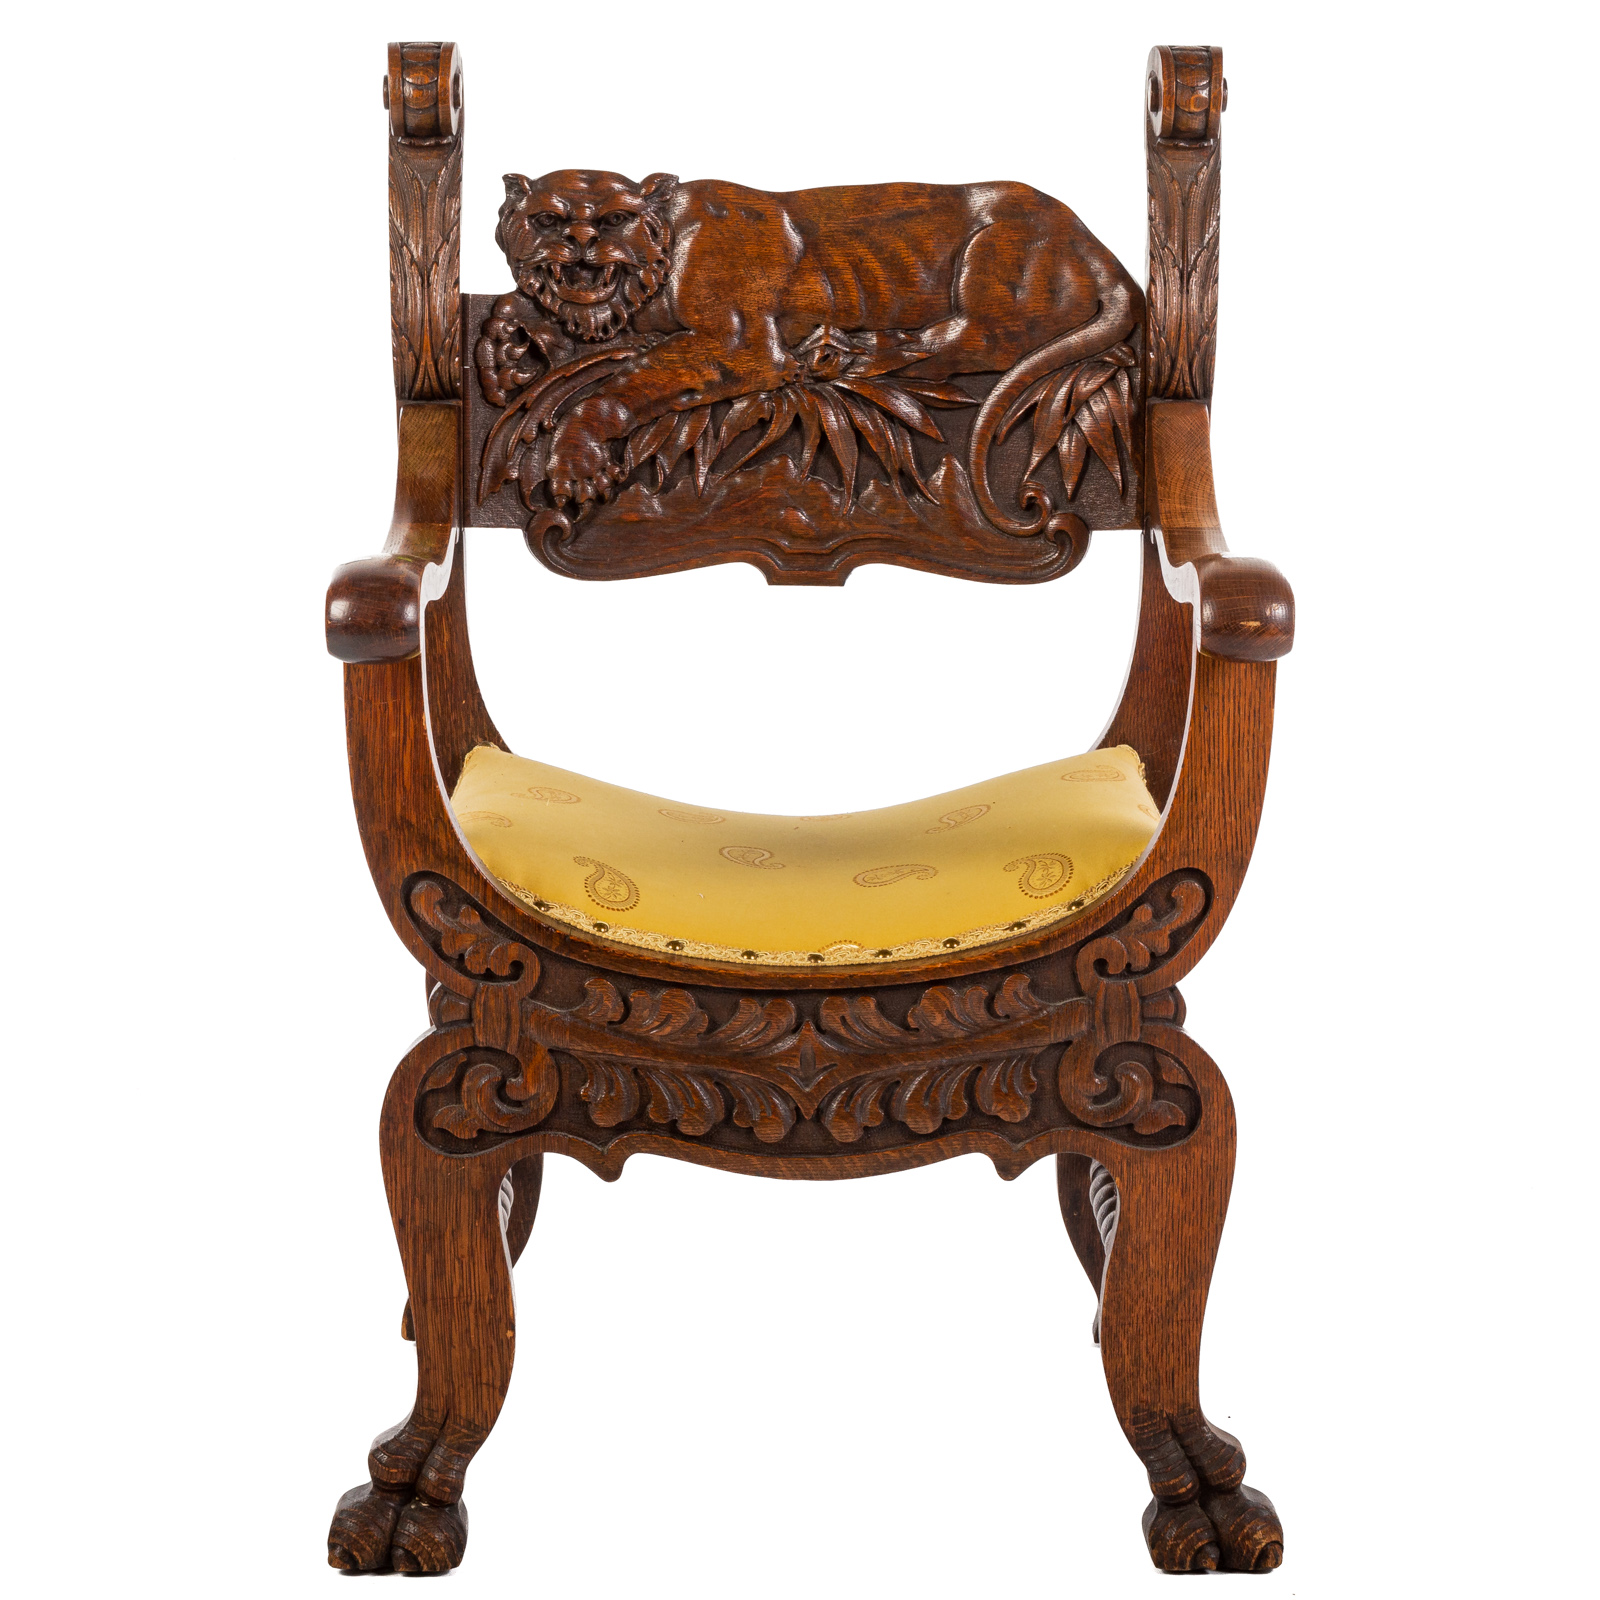 OAK CARVED ARM CHAIR Early 20th 338e6c